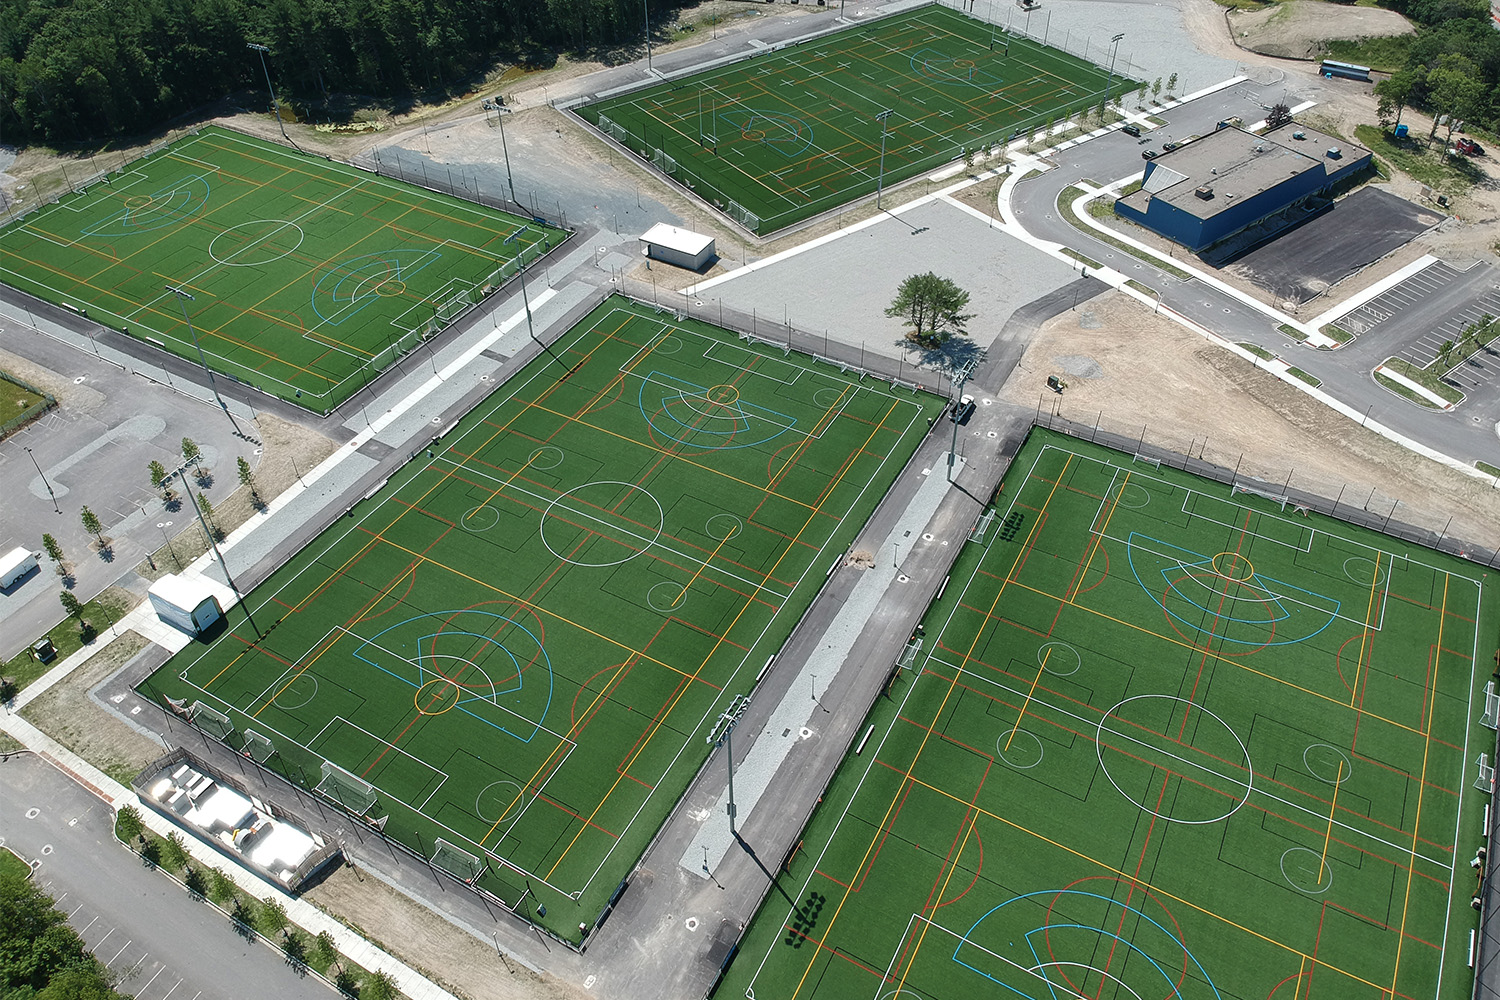 Drone view of 4 soccer fields 